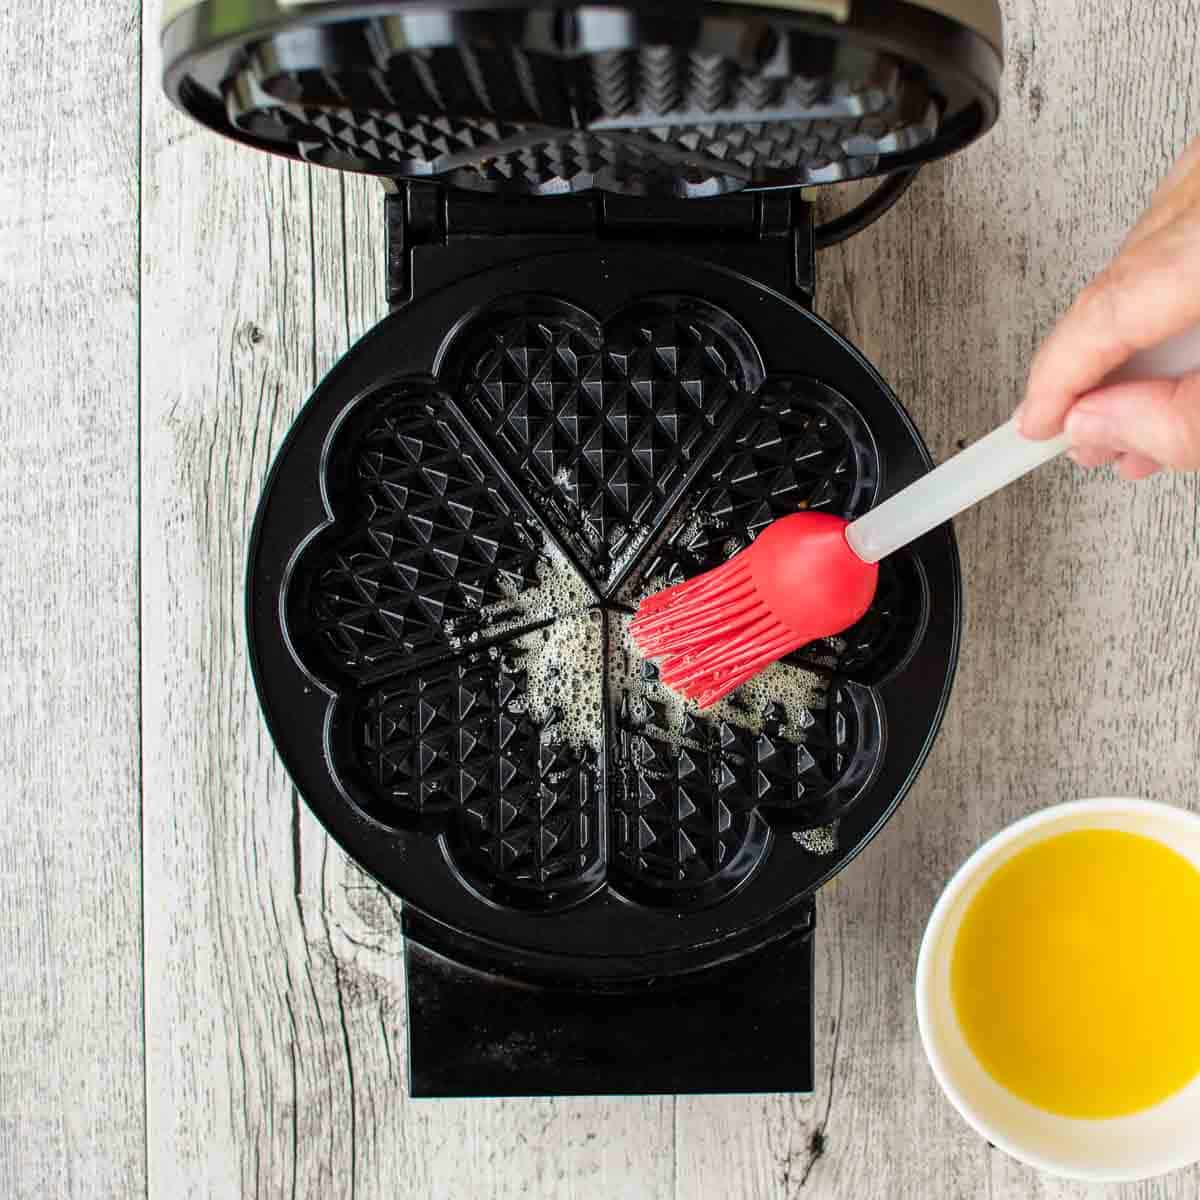 Melted butter brushed onto waffle iron with a red silicone brush viewed from above.